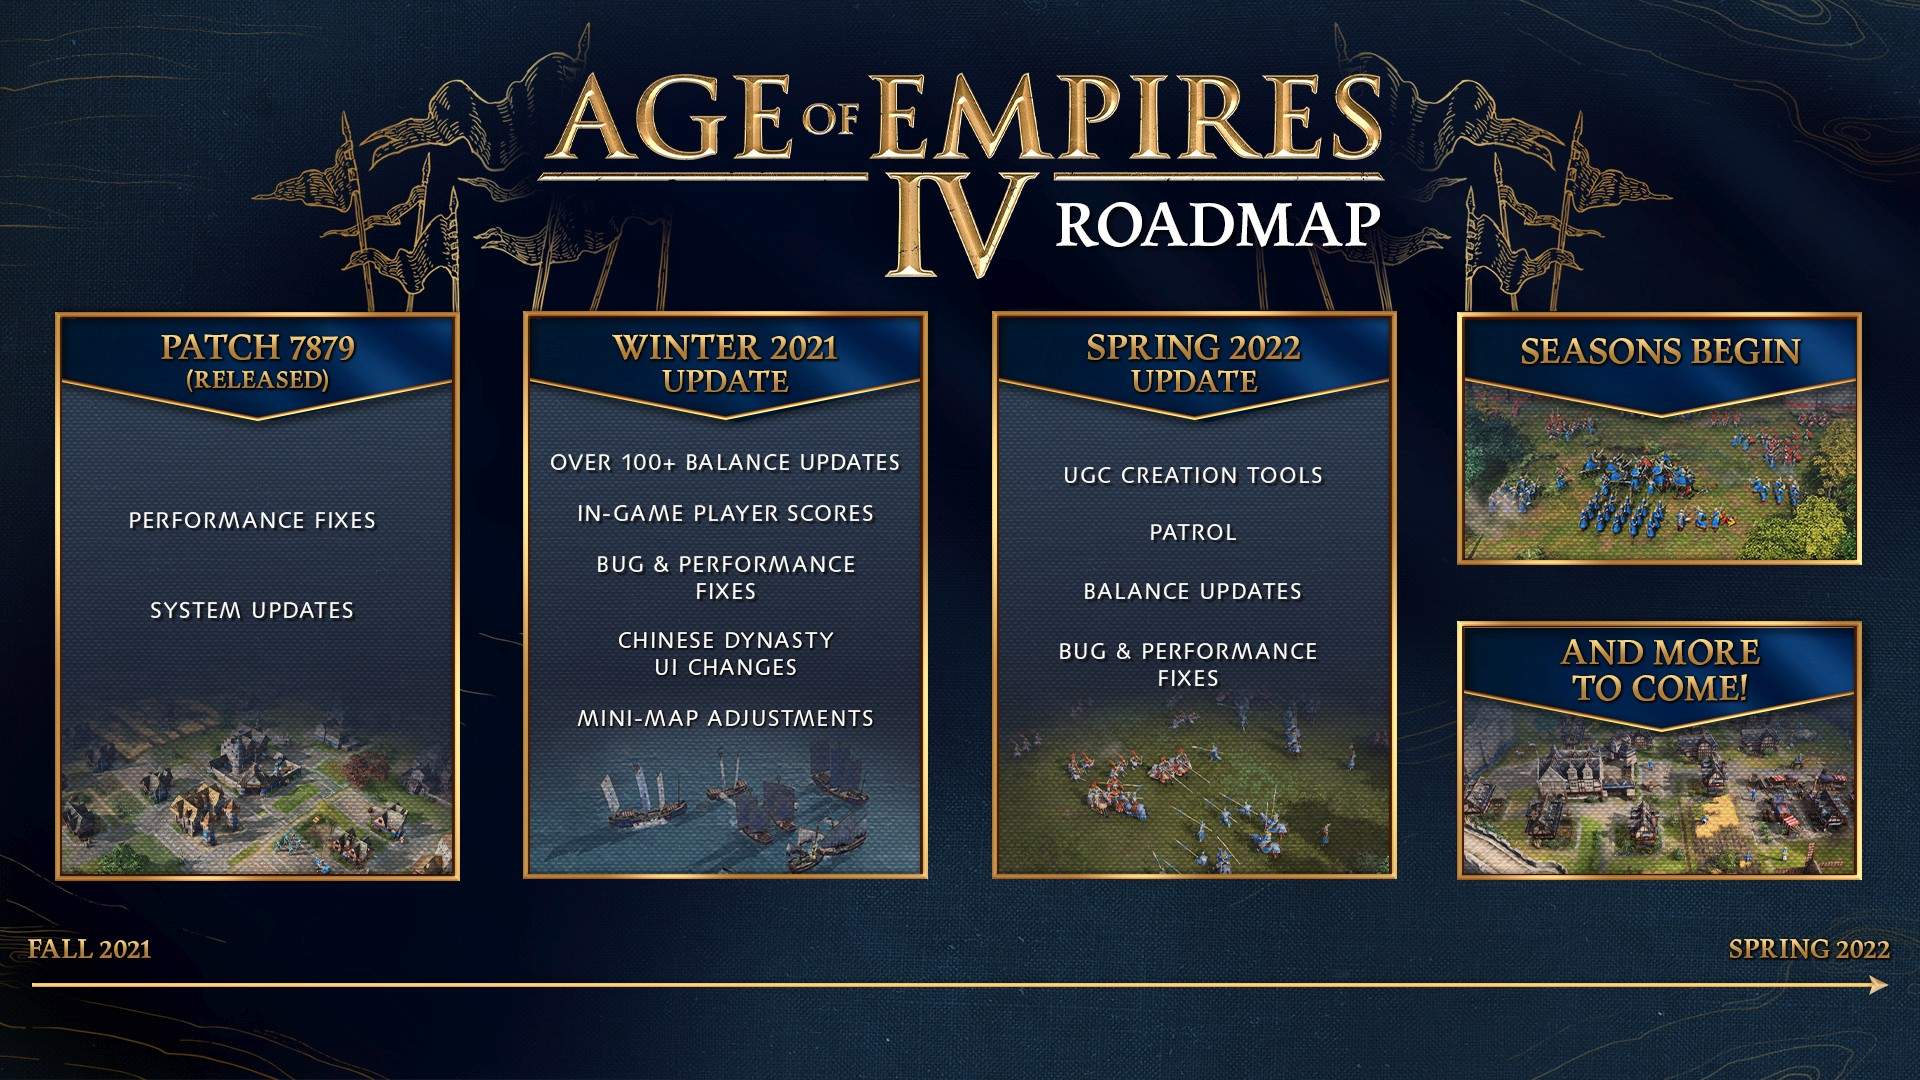 Age of Empires IV: What Will the Next Seasons Bring?